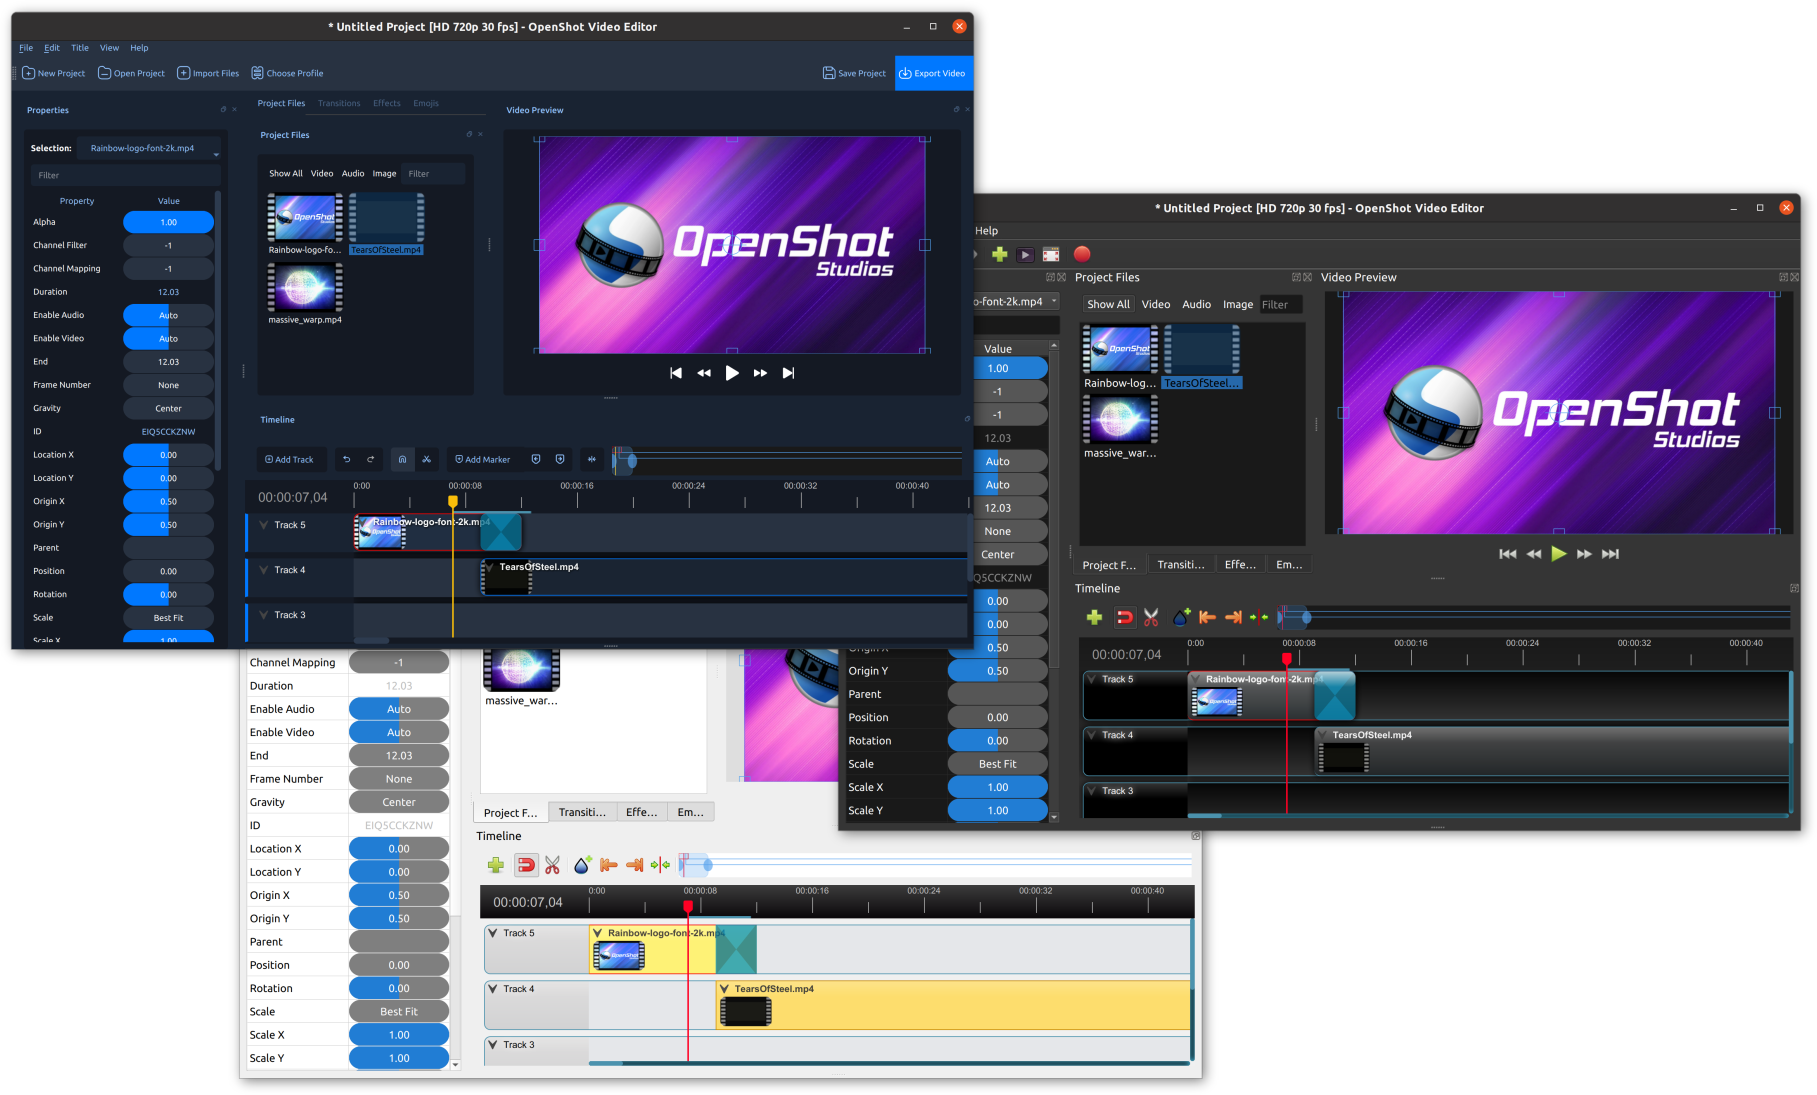 OpenShot 3.2.1 includes the latest stability fixes, enhanced themes, and is a game-changer for free, open-source video editors!